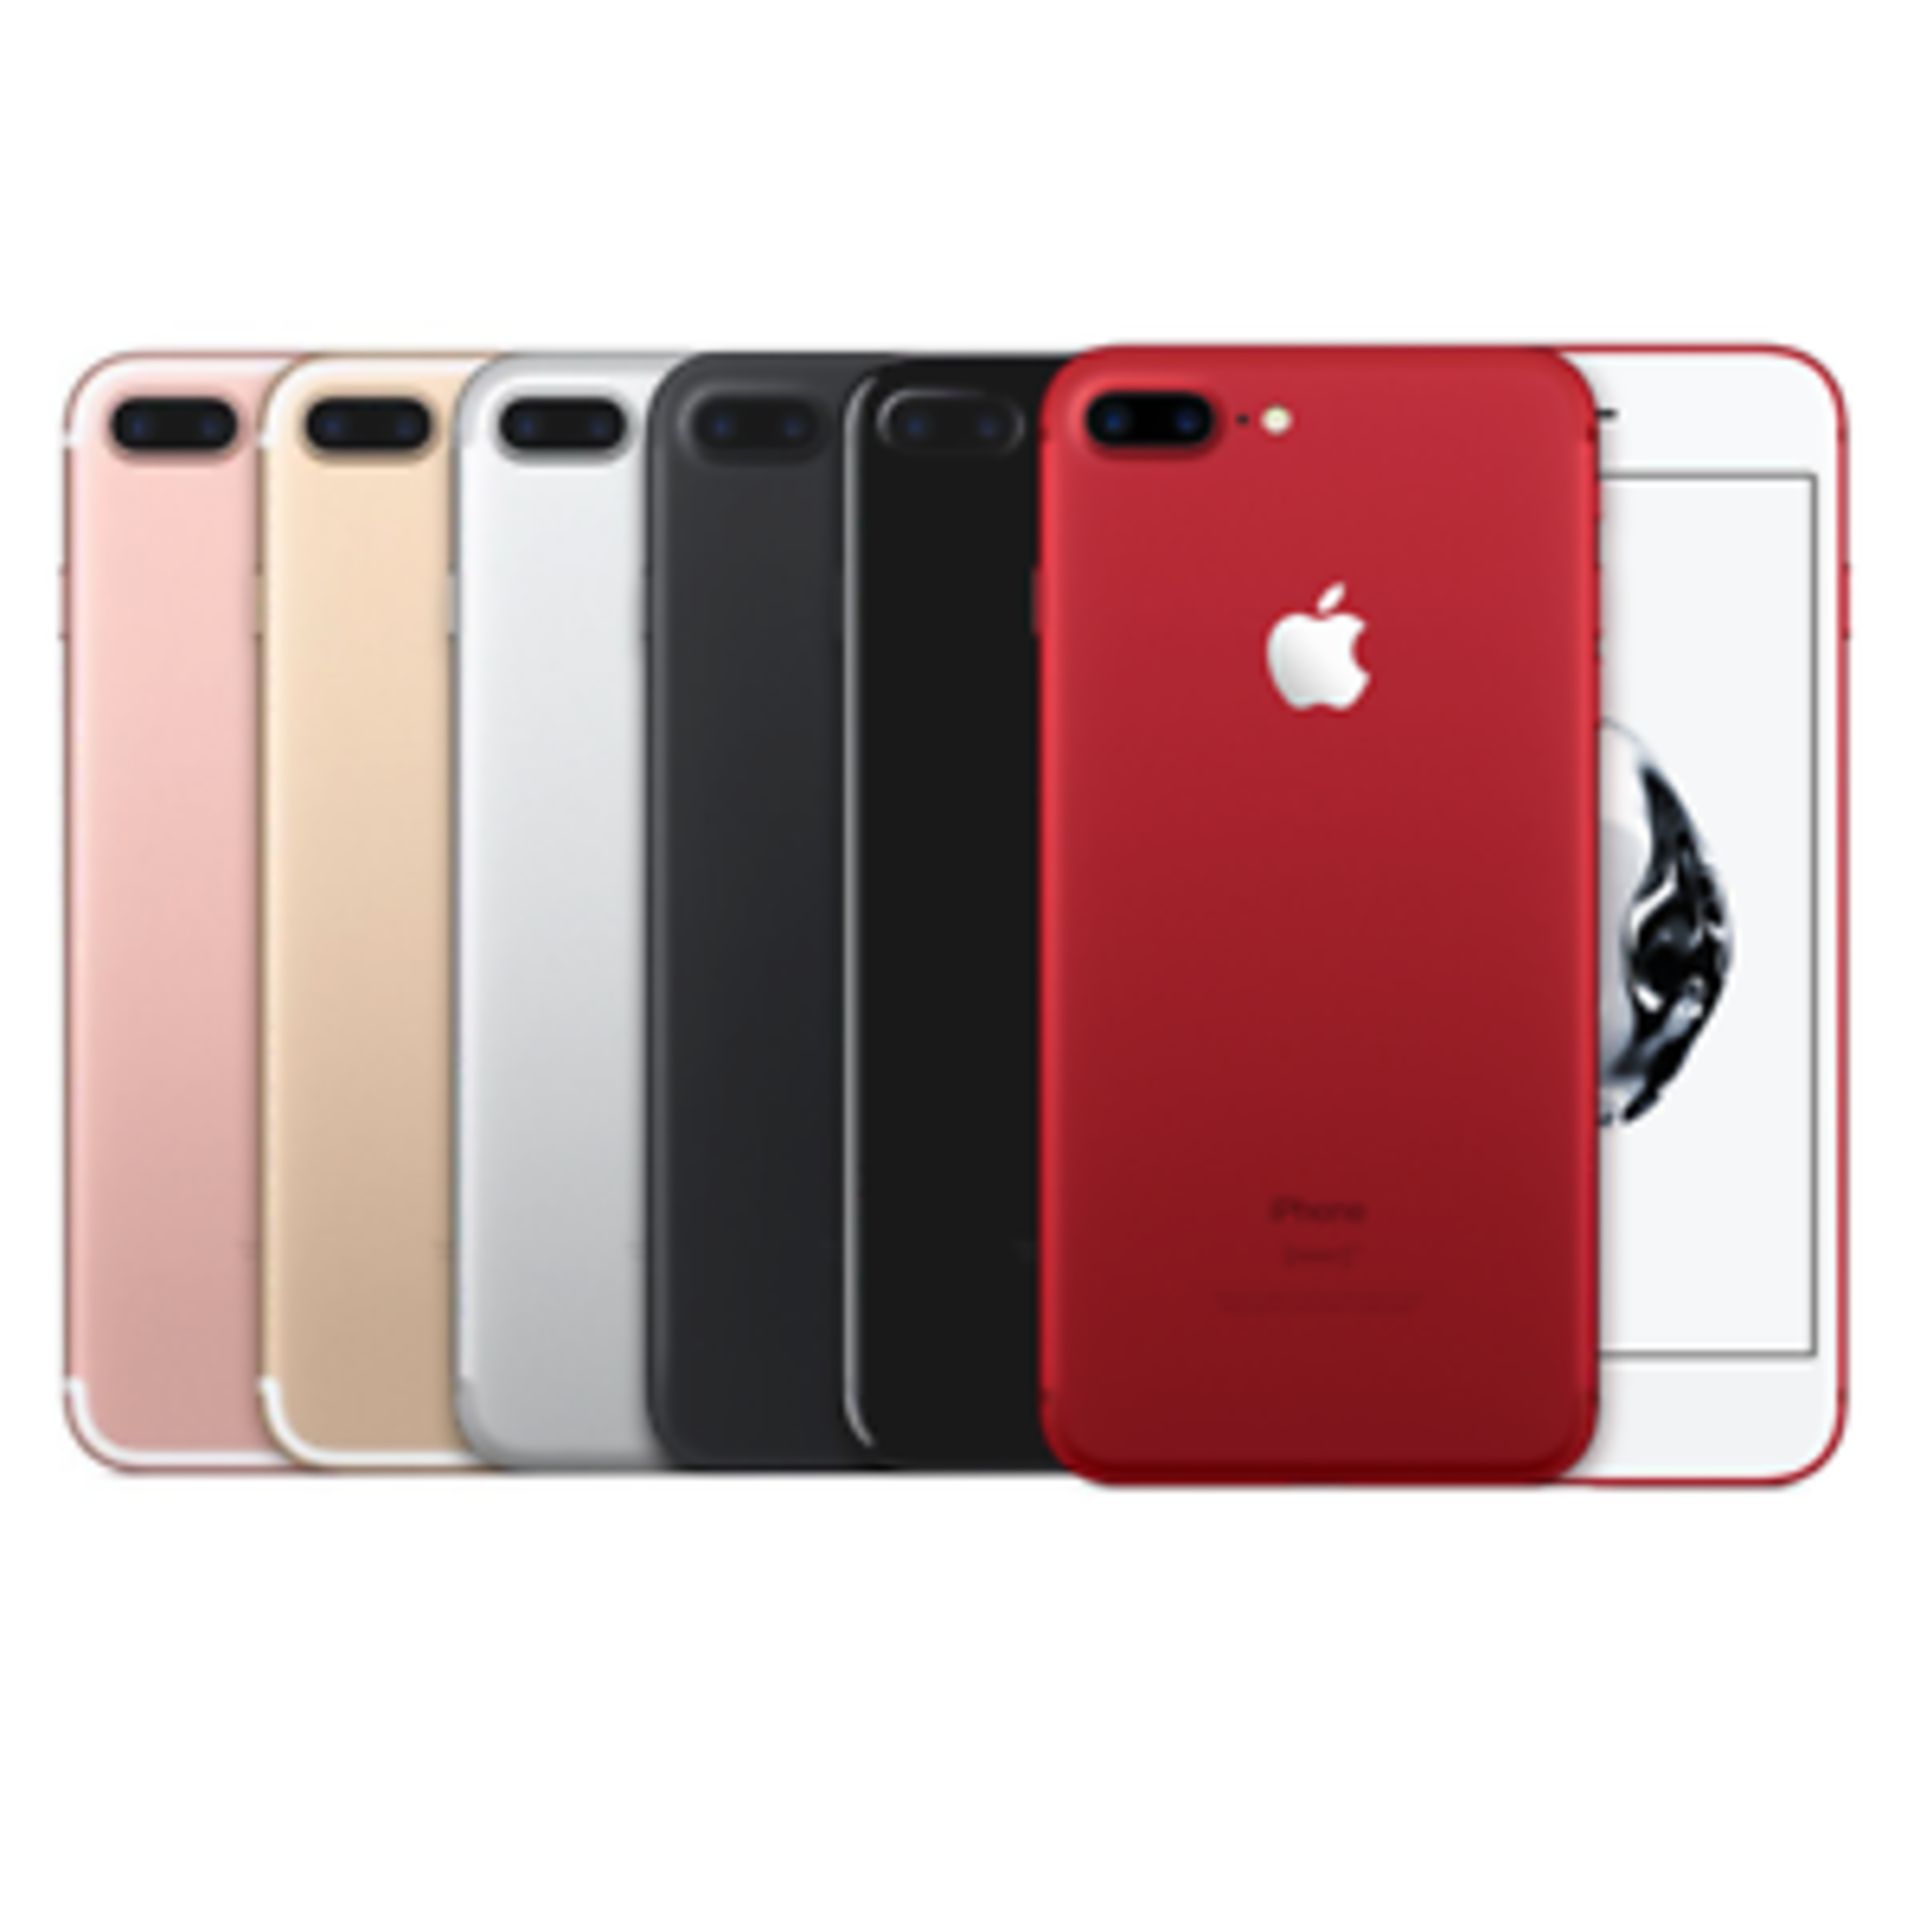 Grade A Apple iPhone 7 Plus 128GB - Colours May Vary - Apple Box With Accessories - Item available - Image 2 of 2